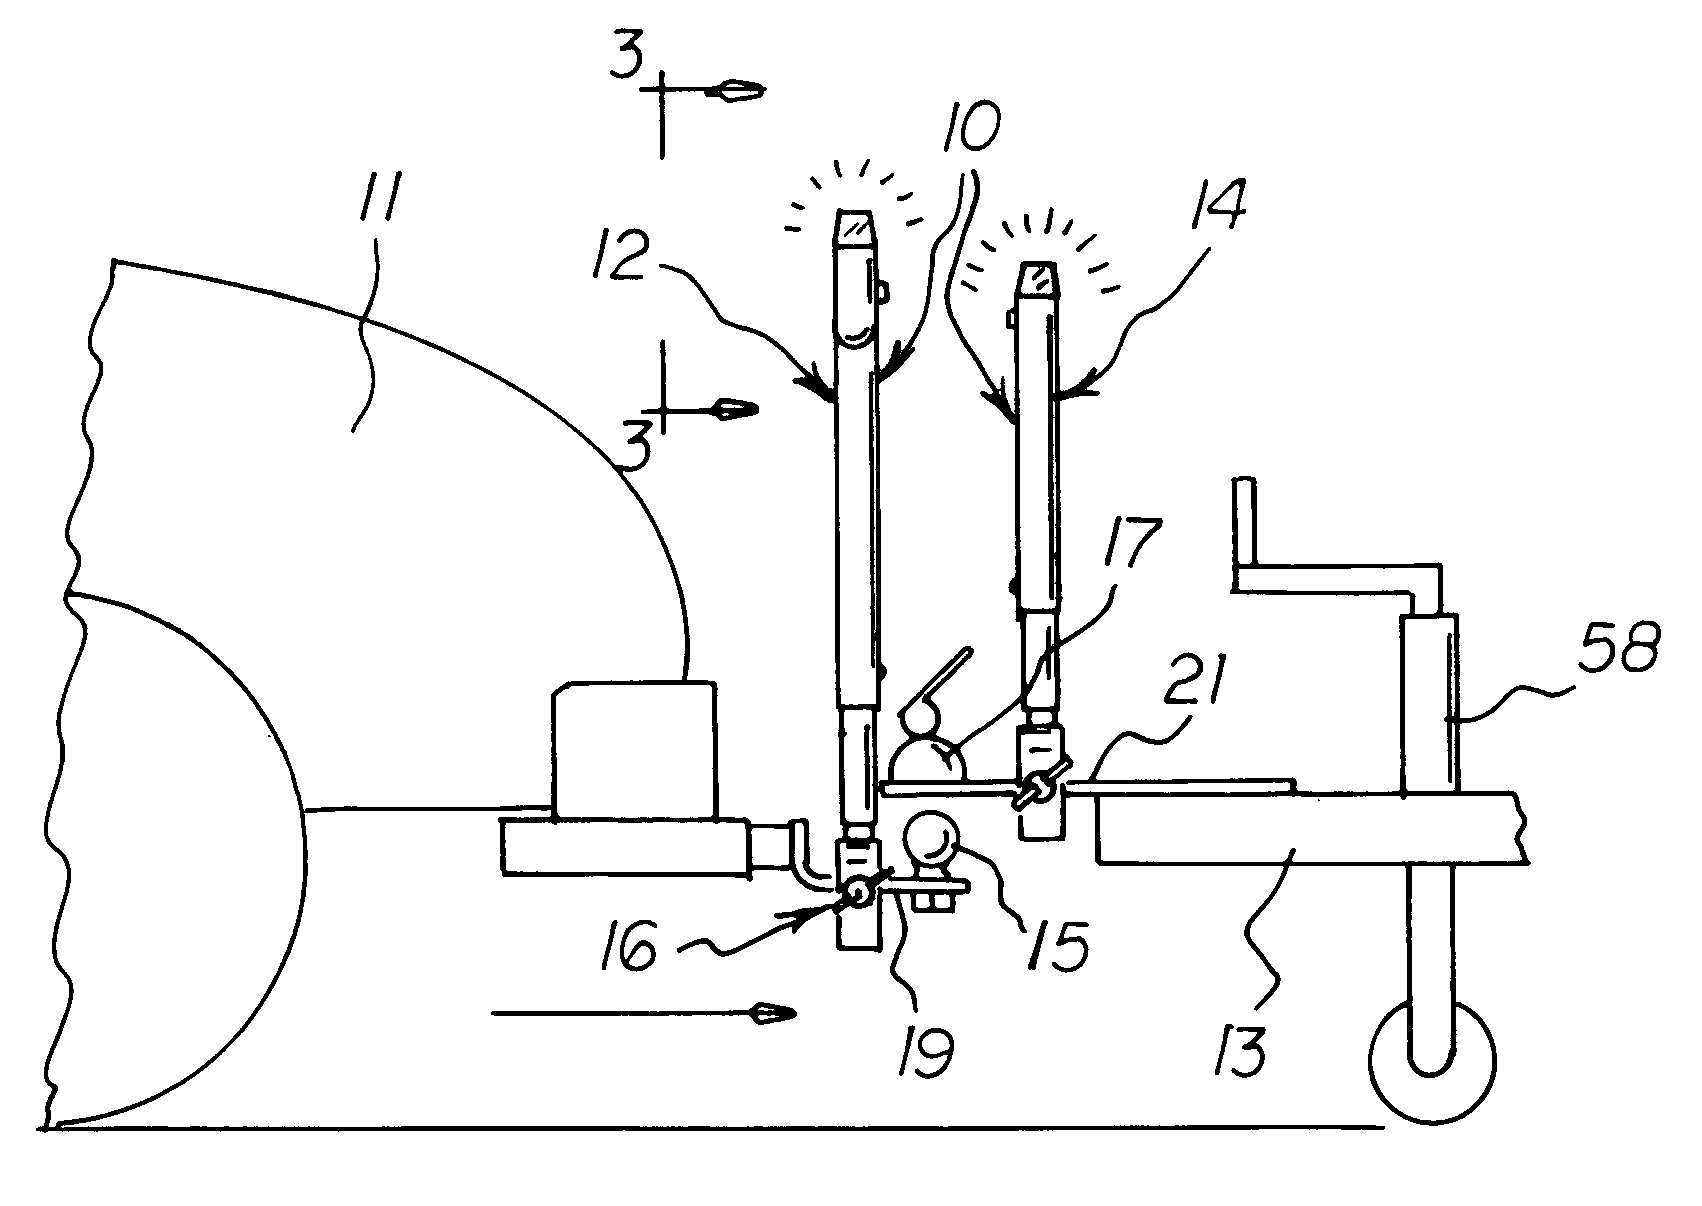 Vehicle and trailer mounted hitch alignment apparatus